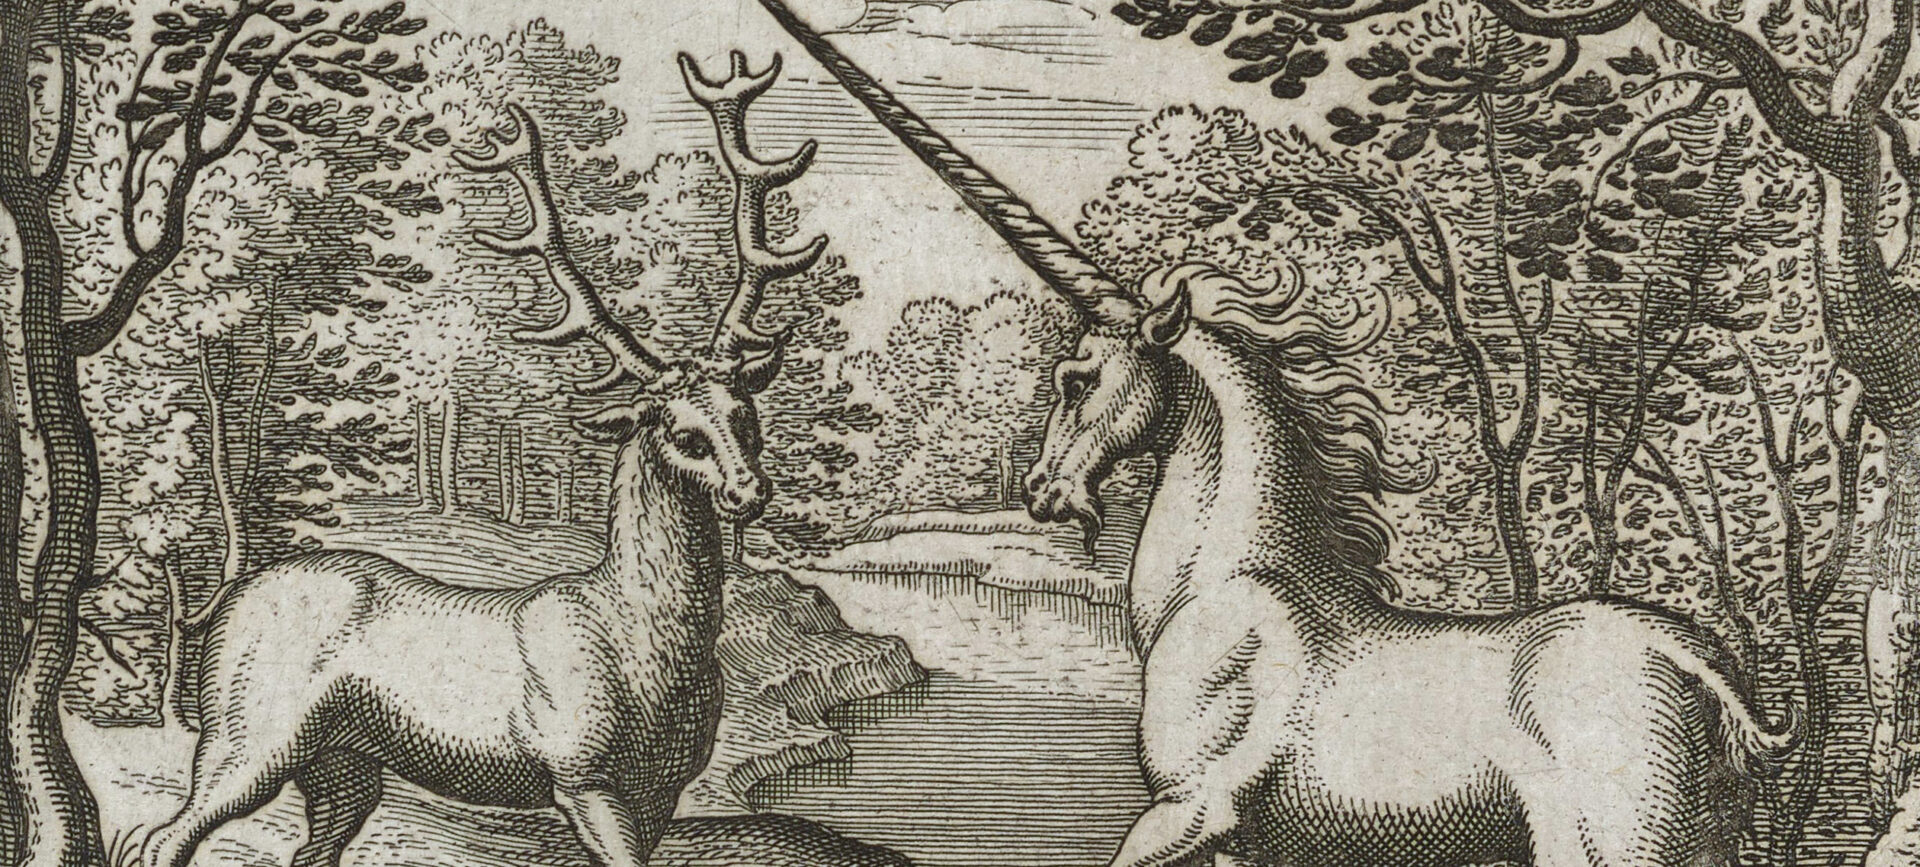 engraved illustration of a deer and unicorn in a forest